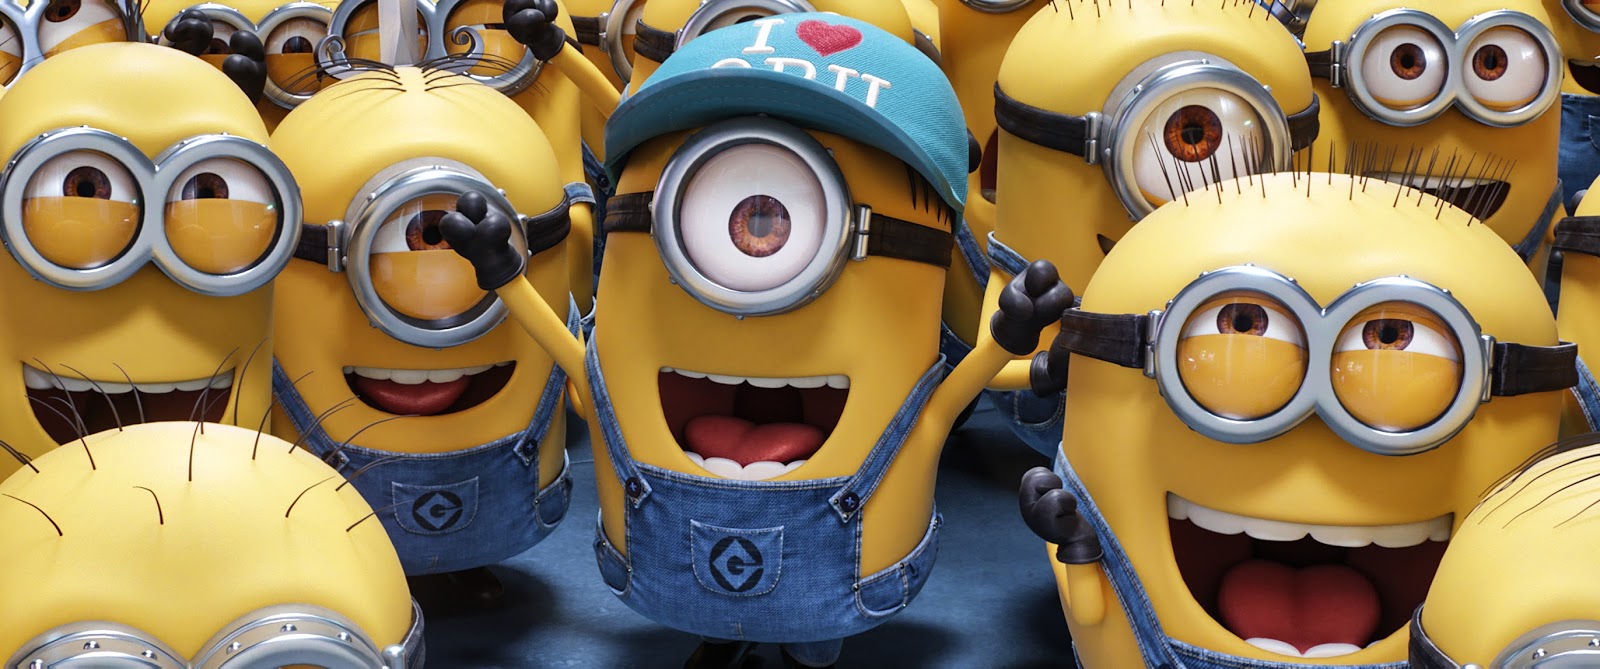 Enter The Despicable Me 3 And Thinkway Toys Giveaway Expired